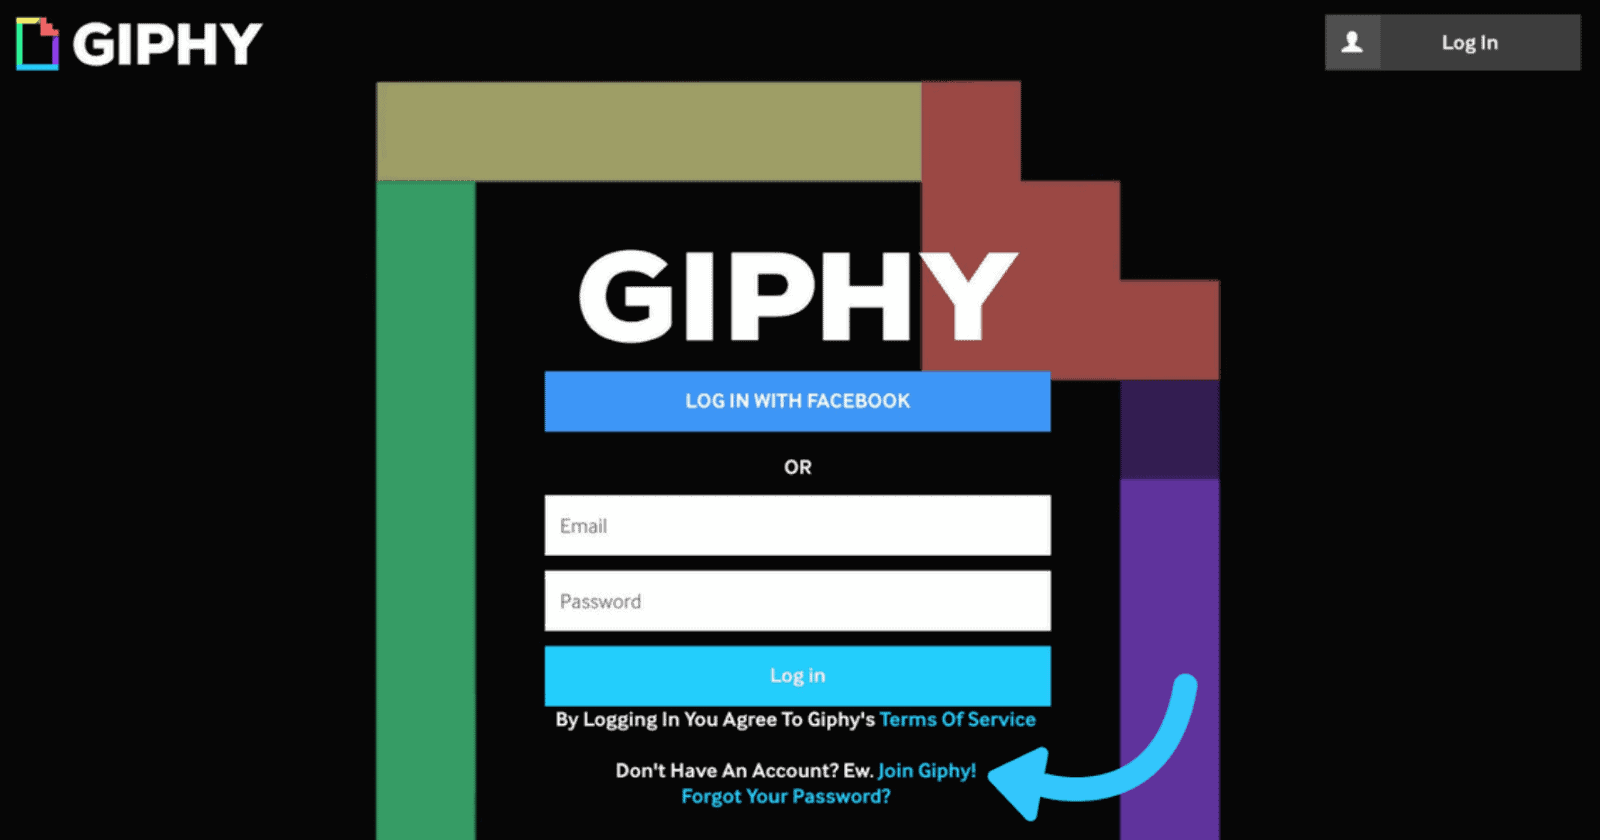 Landing page of giphy.com